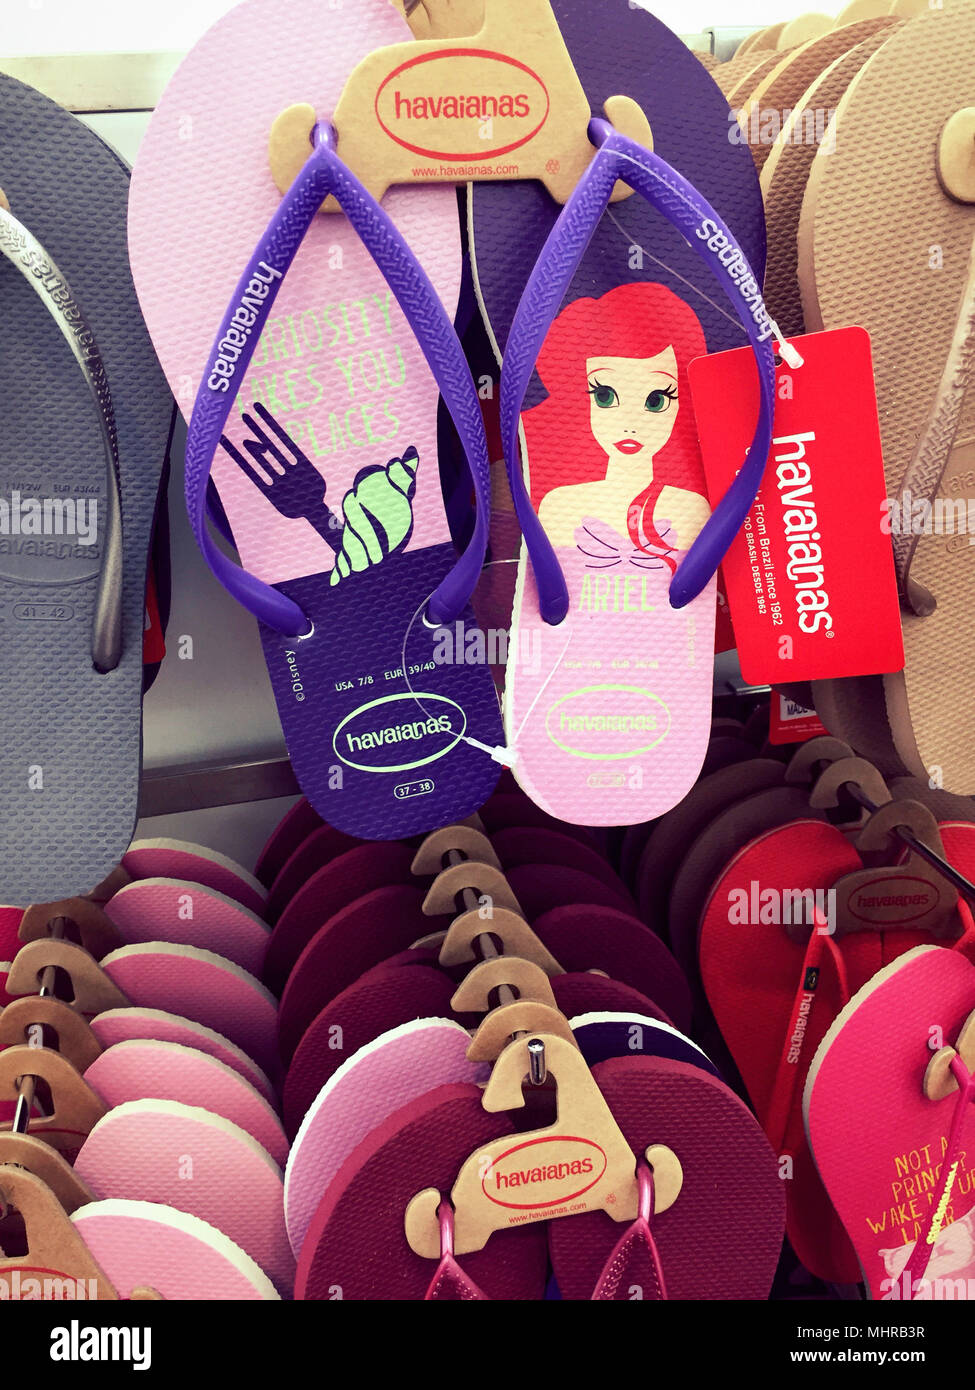 Havaianas Flip Flops Display at Lord & Taylor in New York City, USA Stock Photo